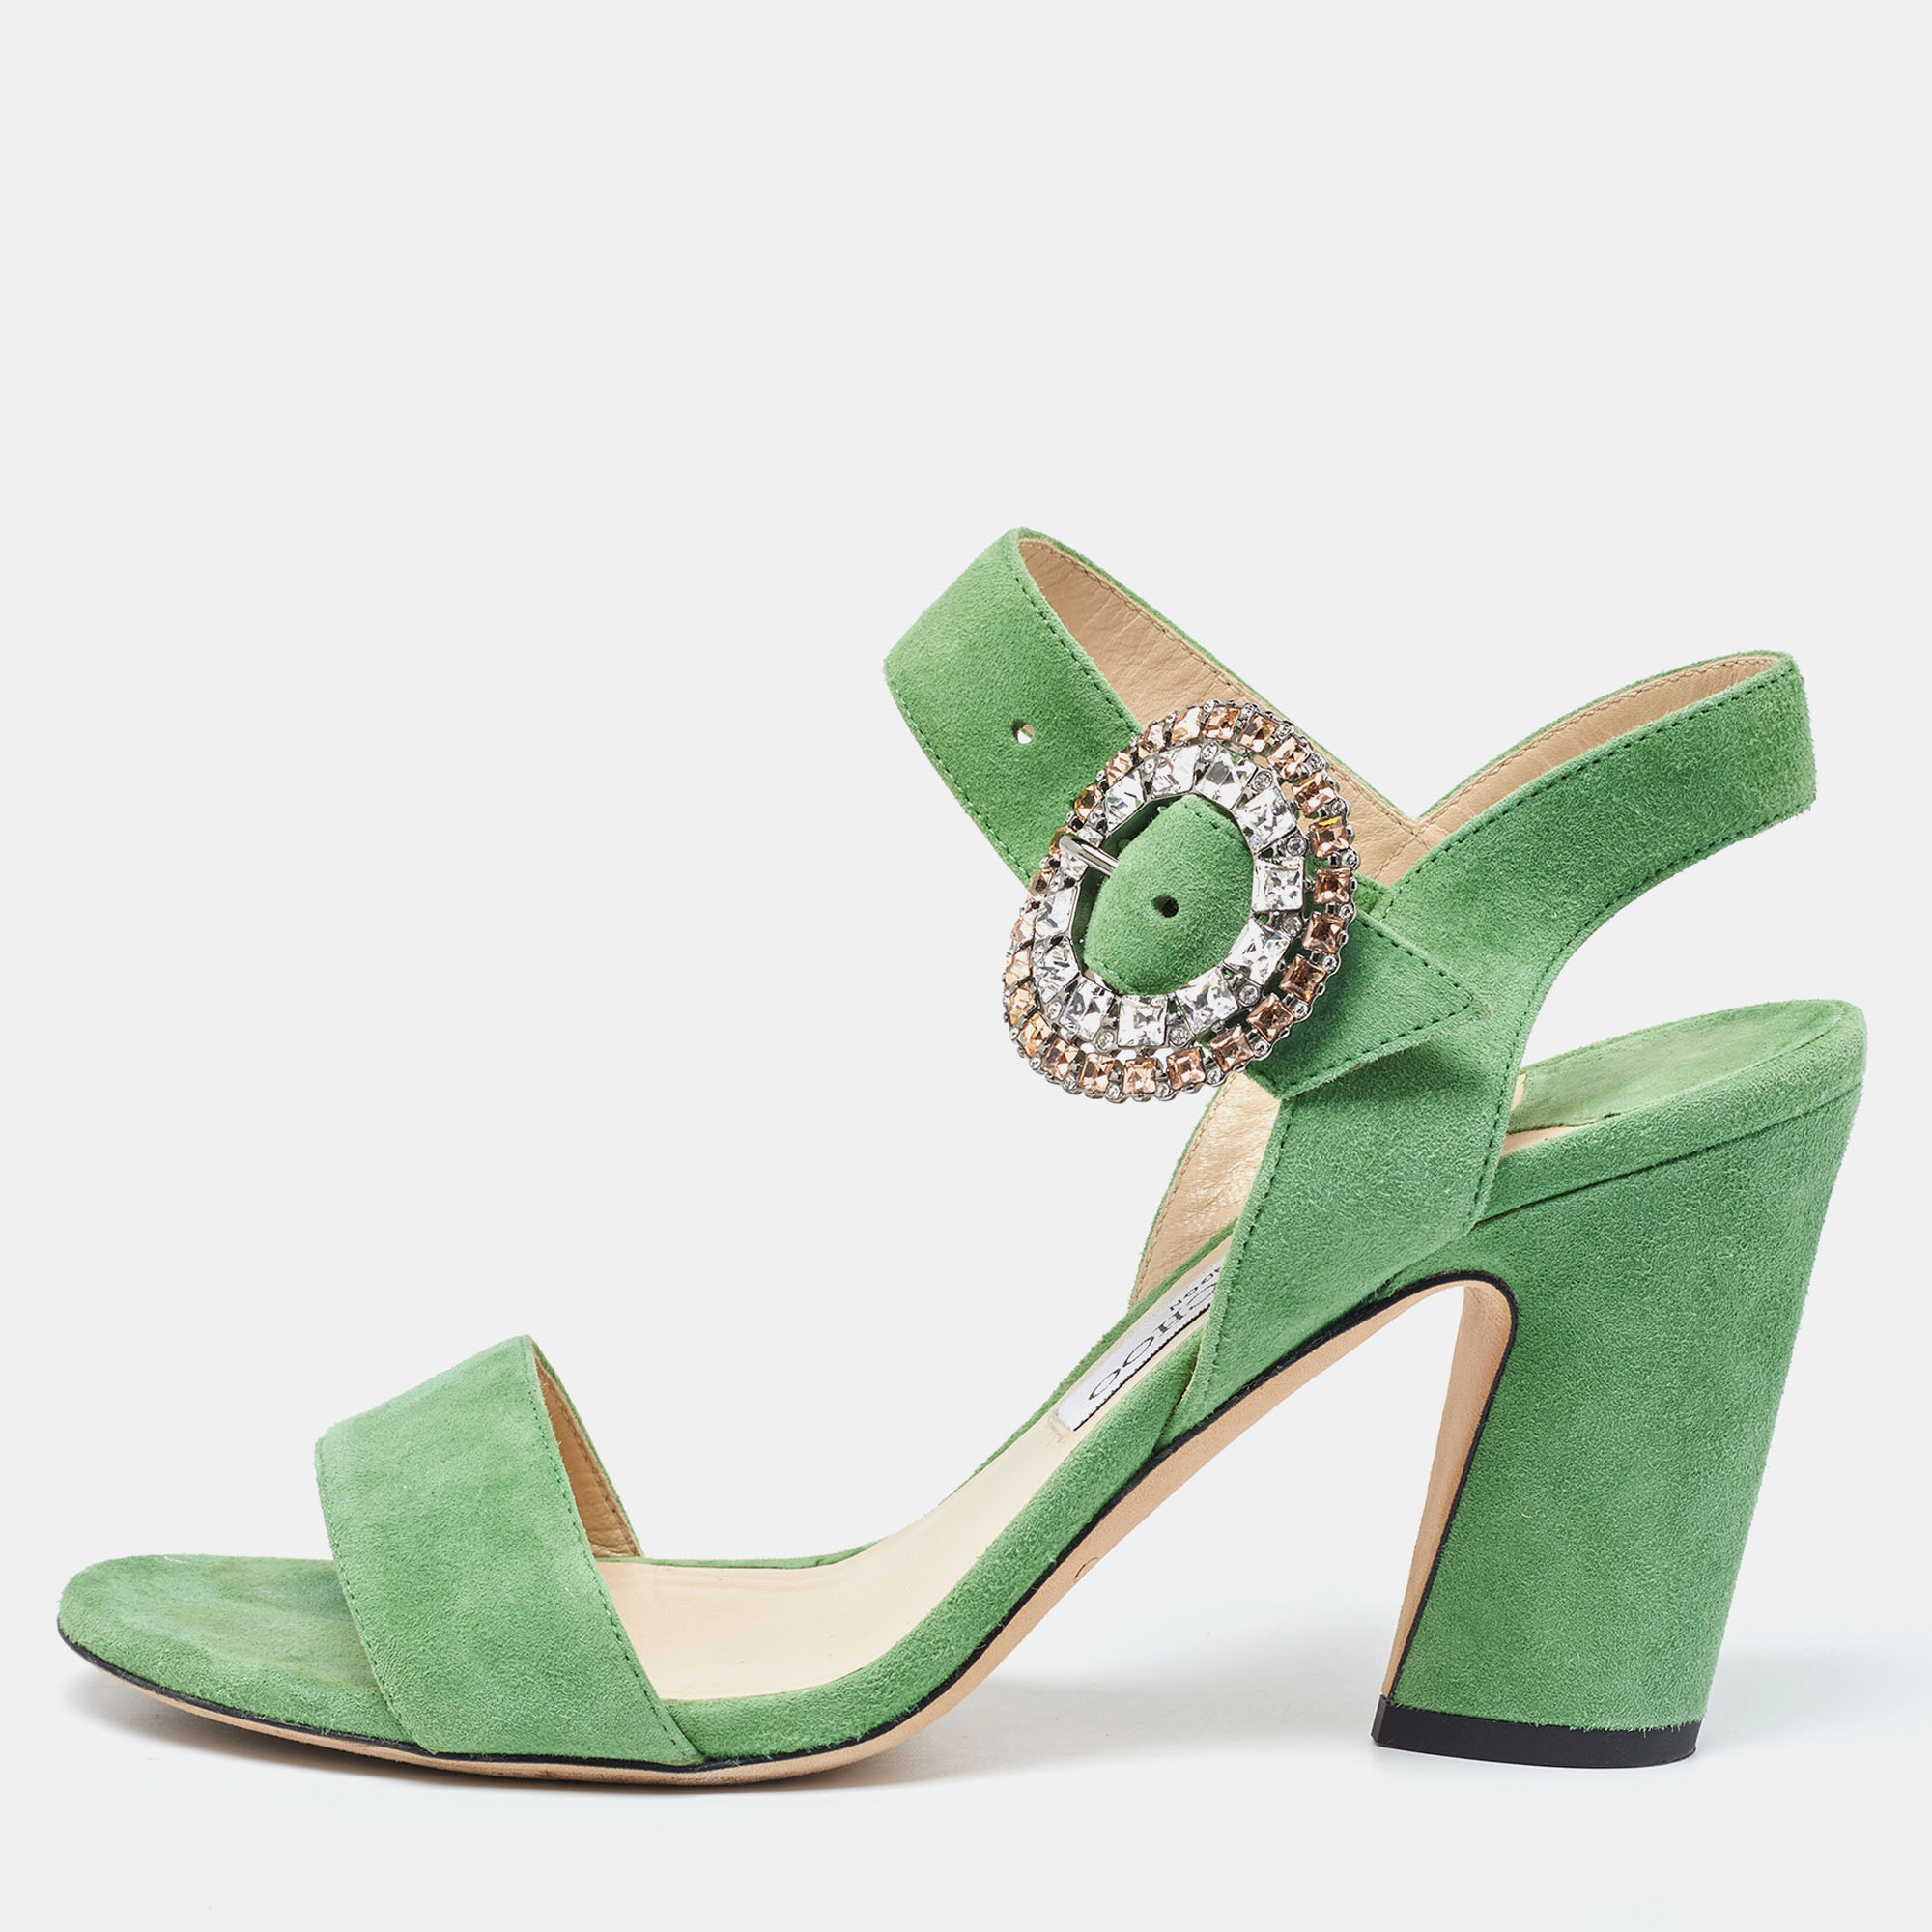 Jimmy choo green suede ankle strap sandals size 38.5